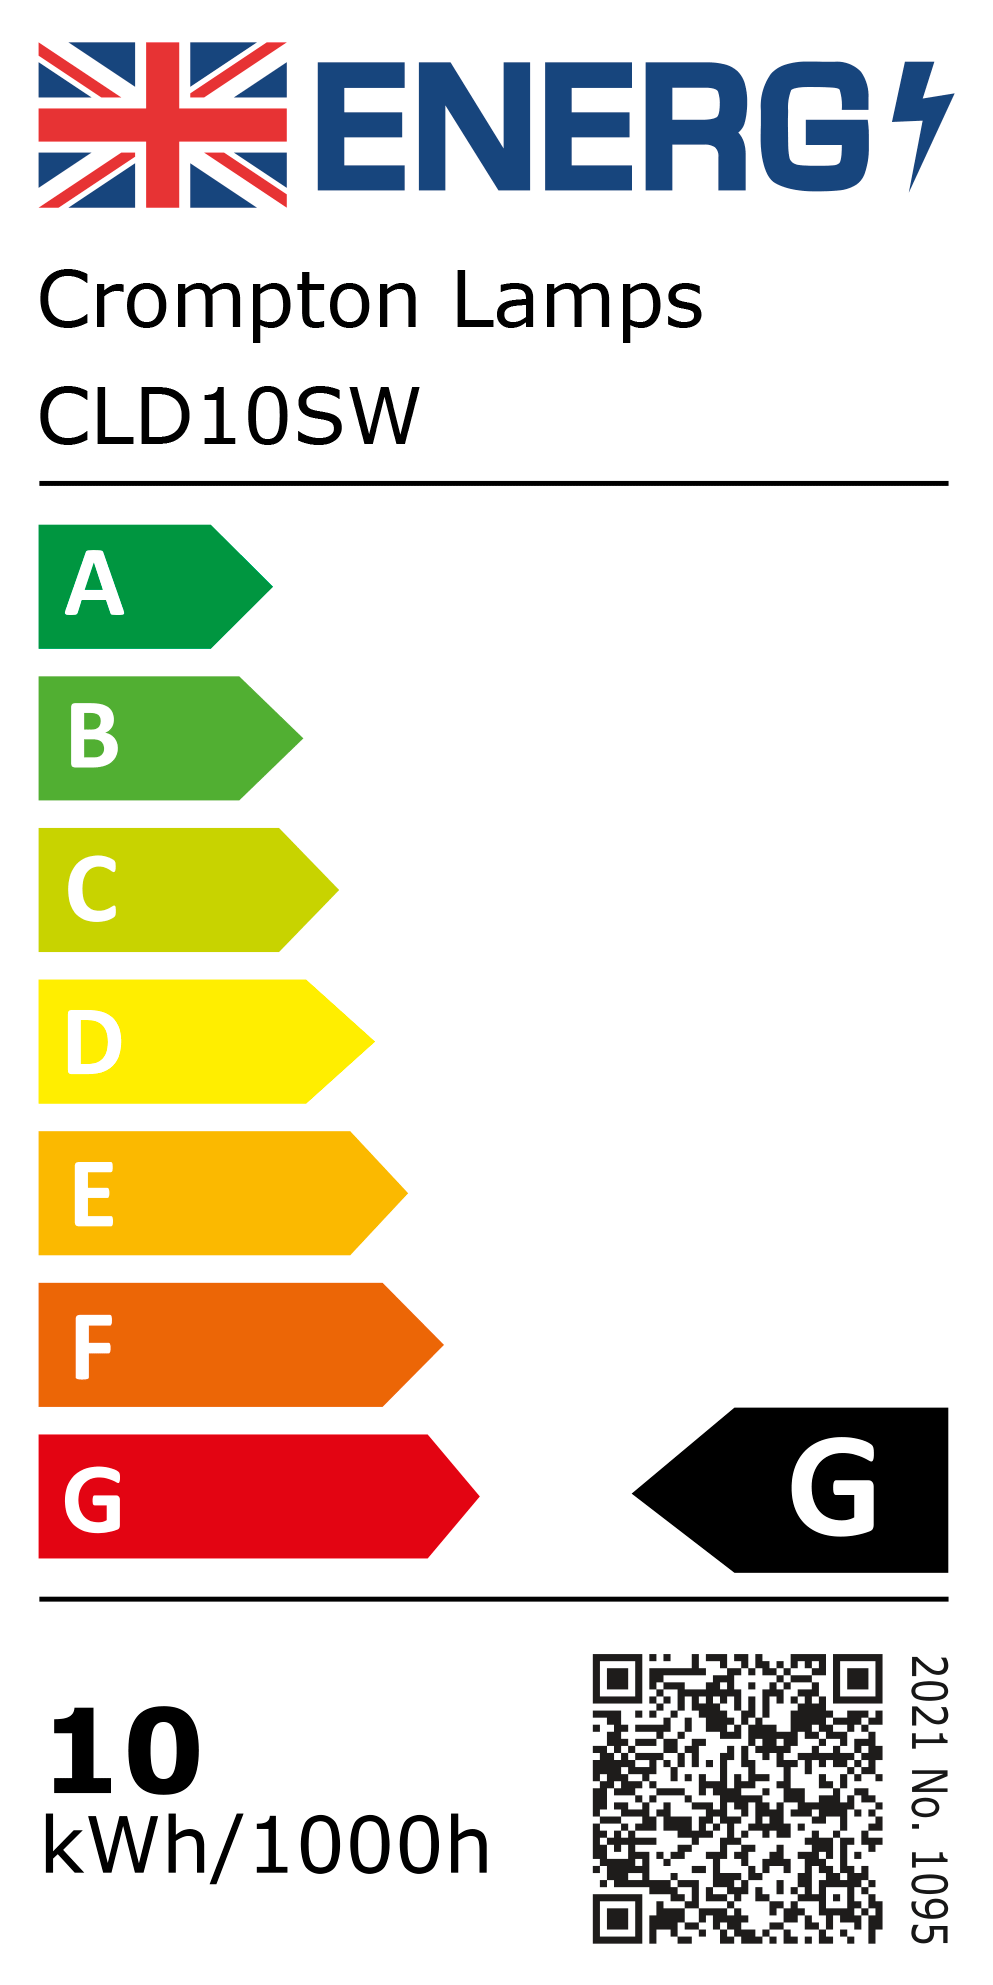 New 2021 Energy Rating Label: Stock Code CLD10SW